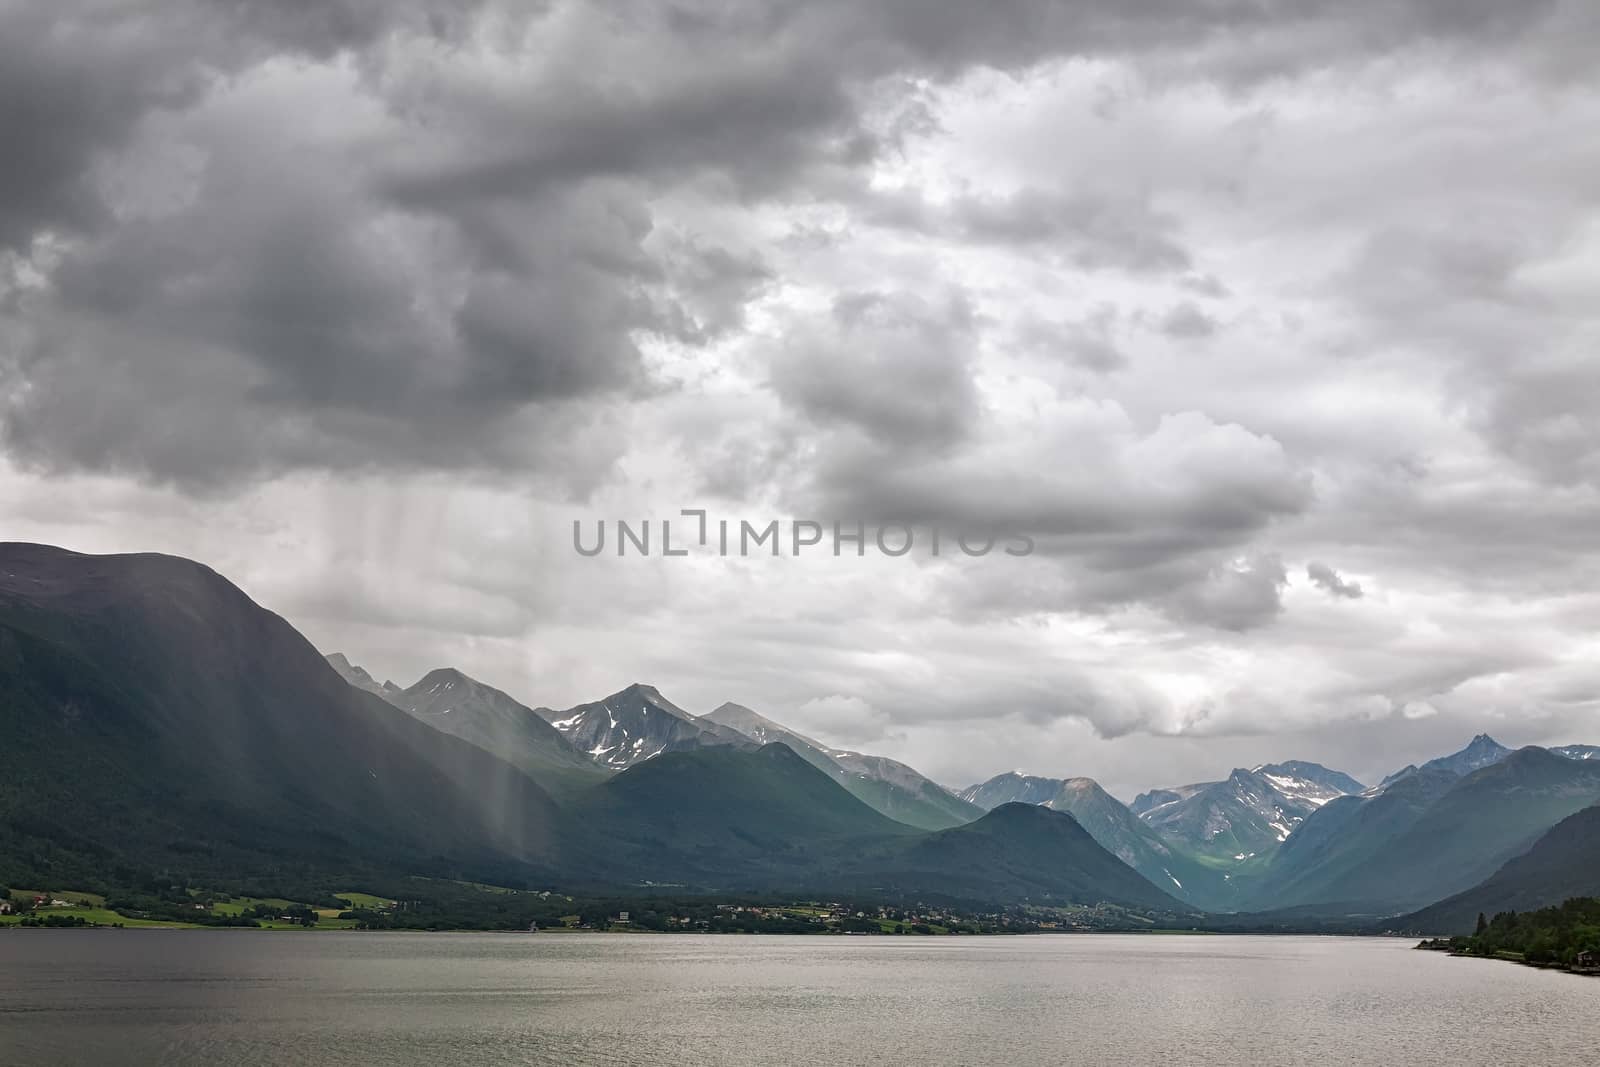 Raining in the mountains along the Romsdalsfjorden near Andalsnes, Norway